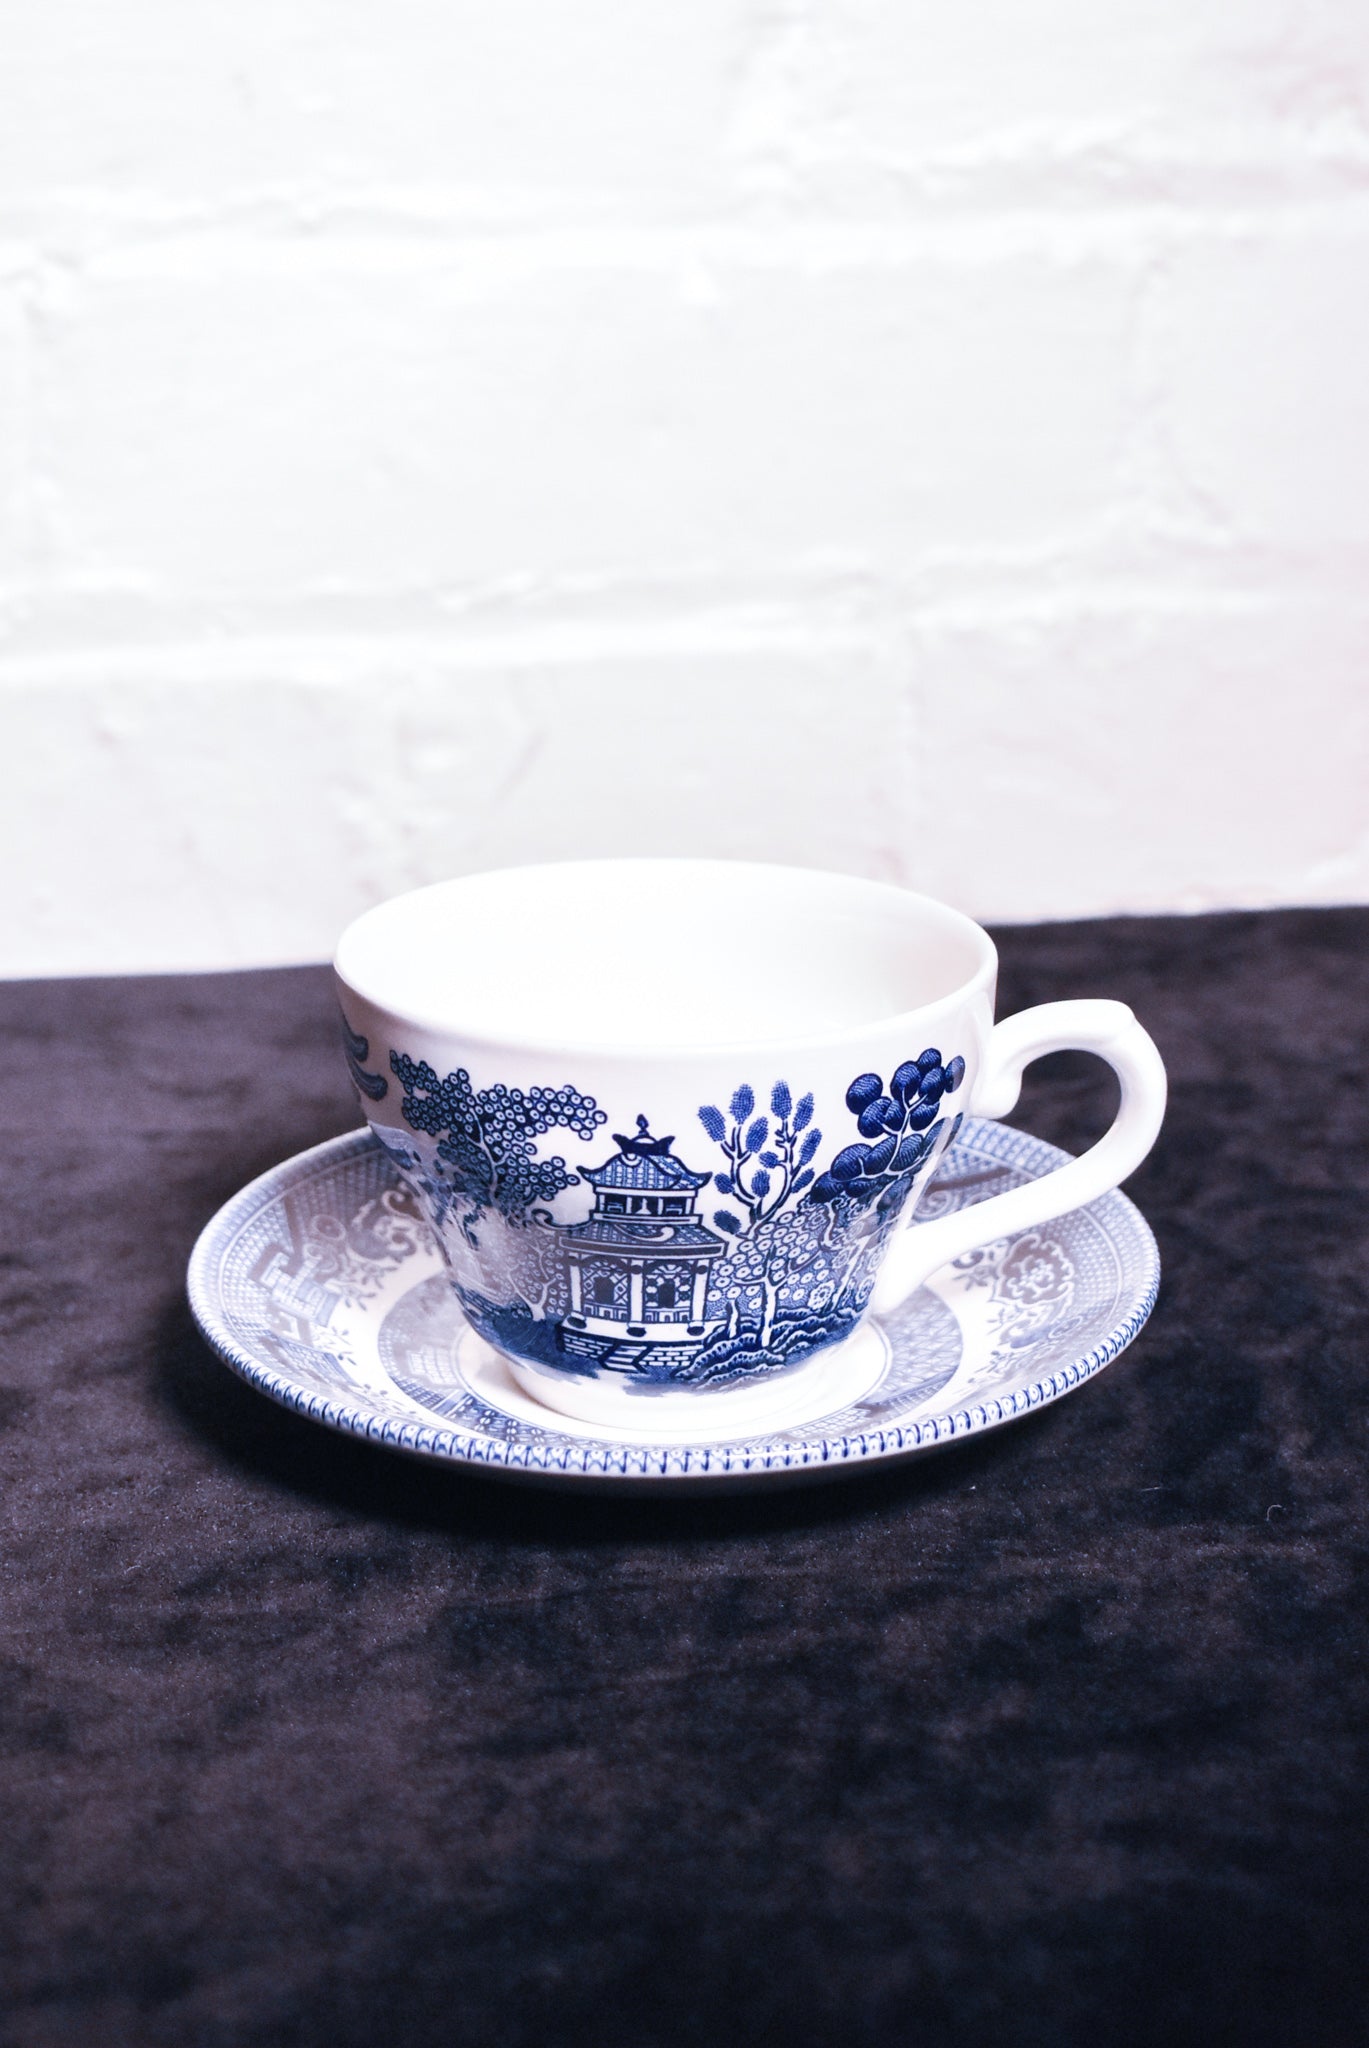 Blue and white cups and saucer. Willow pattern